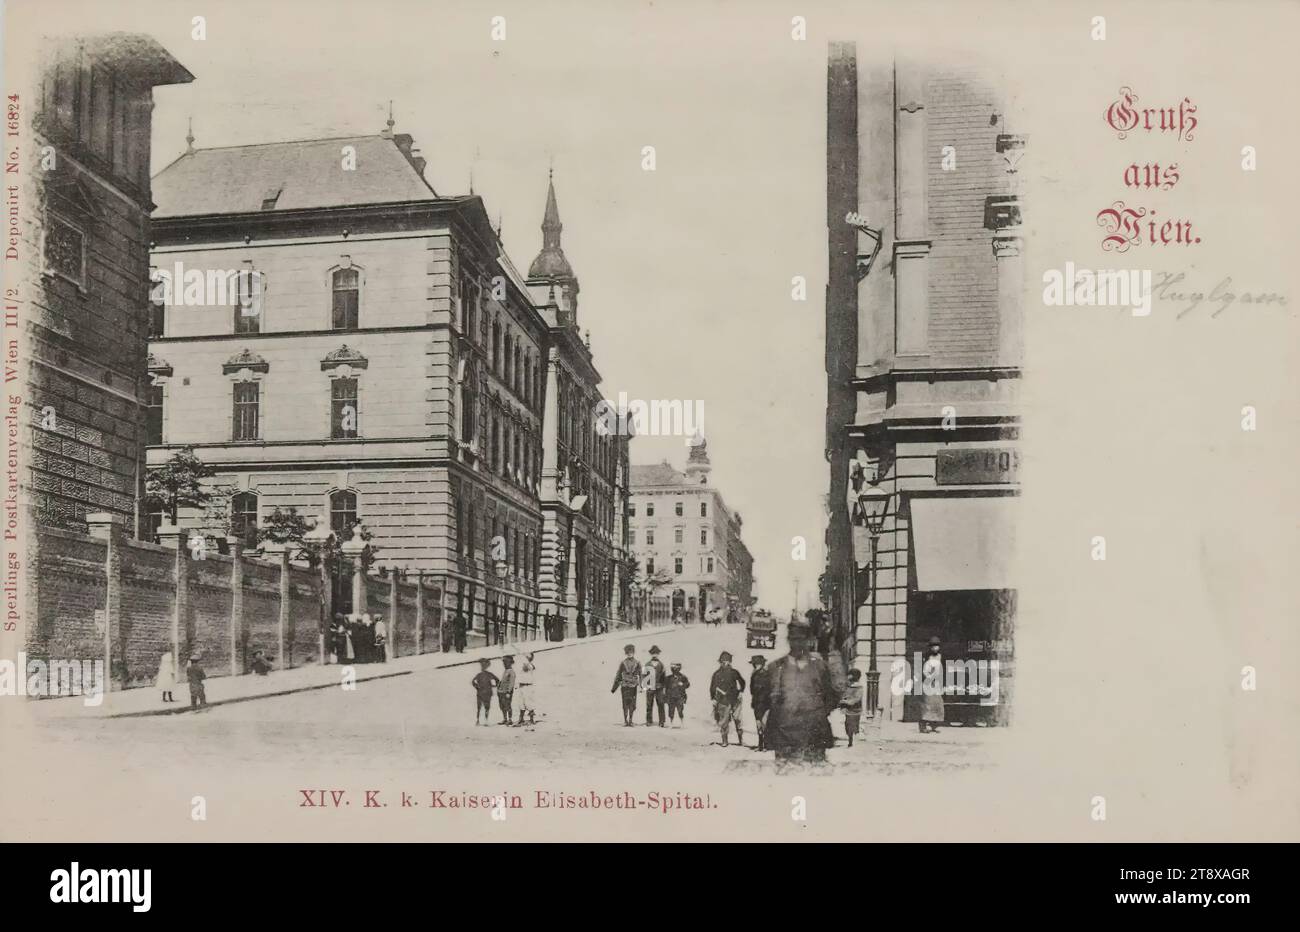 15th, Huglgasse - with Kaiserin-Elisabeth-Spital - view towards Märzstraße, picture postcard, Sperlings Postkartenverlag (M. M. S.), Producer, 1900-1905, paperboard, Collotype, height×width 9, 2×14 cm, Health Care, Vanished Sites and Structures, 15th District: Rudolfsheim-Fünfhaus, hospital, with people, Kaiserin-Elisabeth-Spital, Huglgasse, Märzstraße., The Vienna Collection Stock Photo